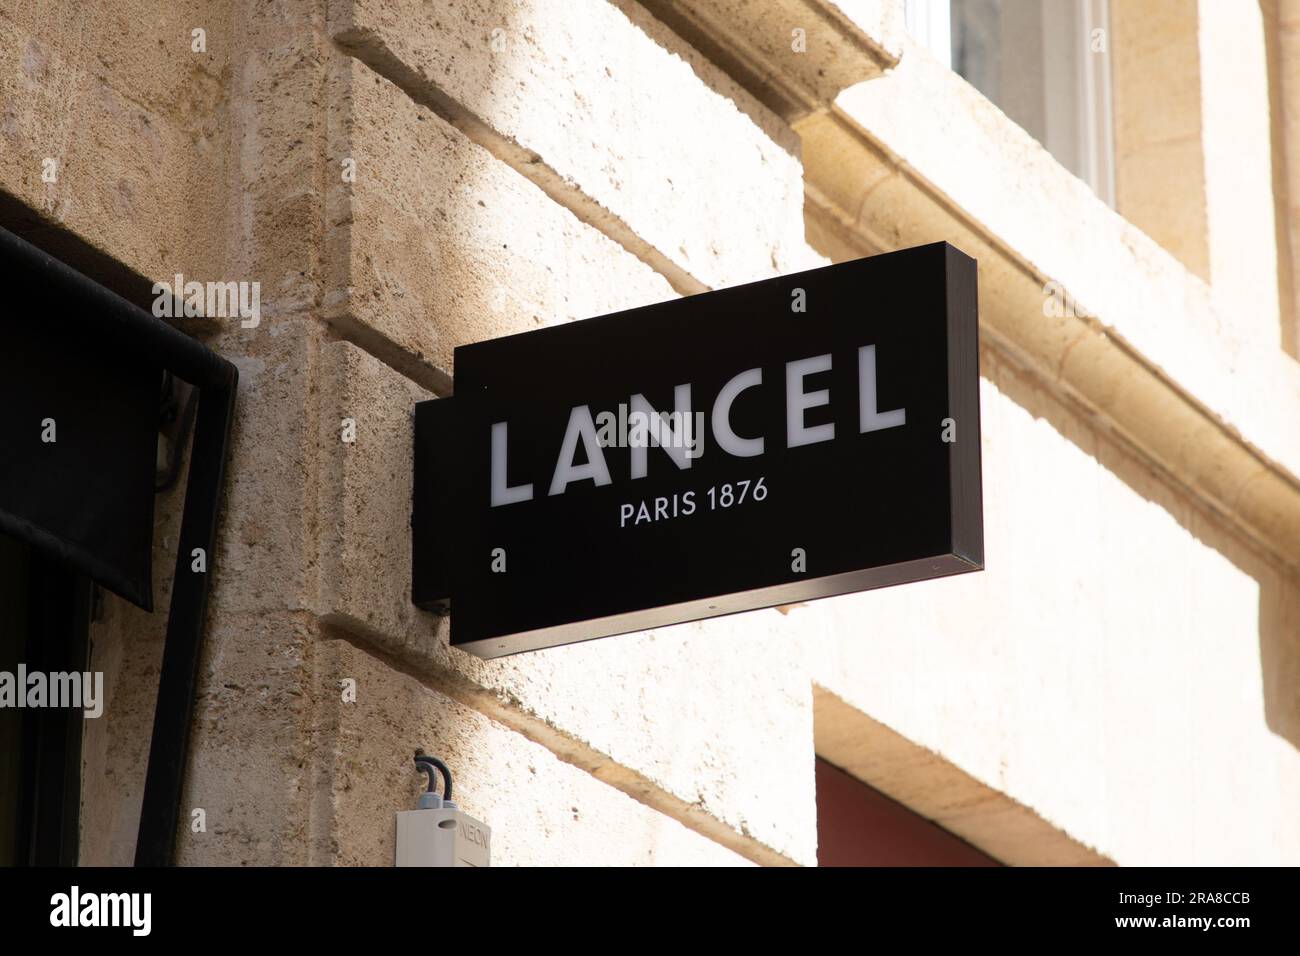 Bordeaux , Aquitaine  France - 06 06 2023 : Lancel boutique logo brand and sign text on facade store chain fashion clothing shop Stock Photo